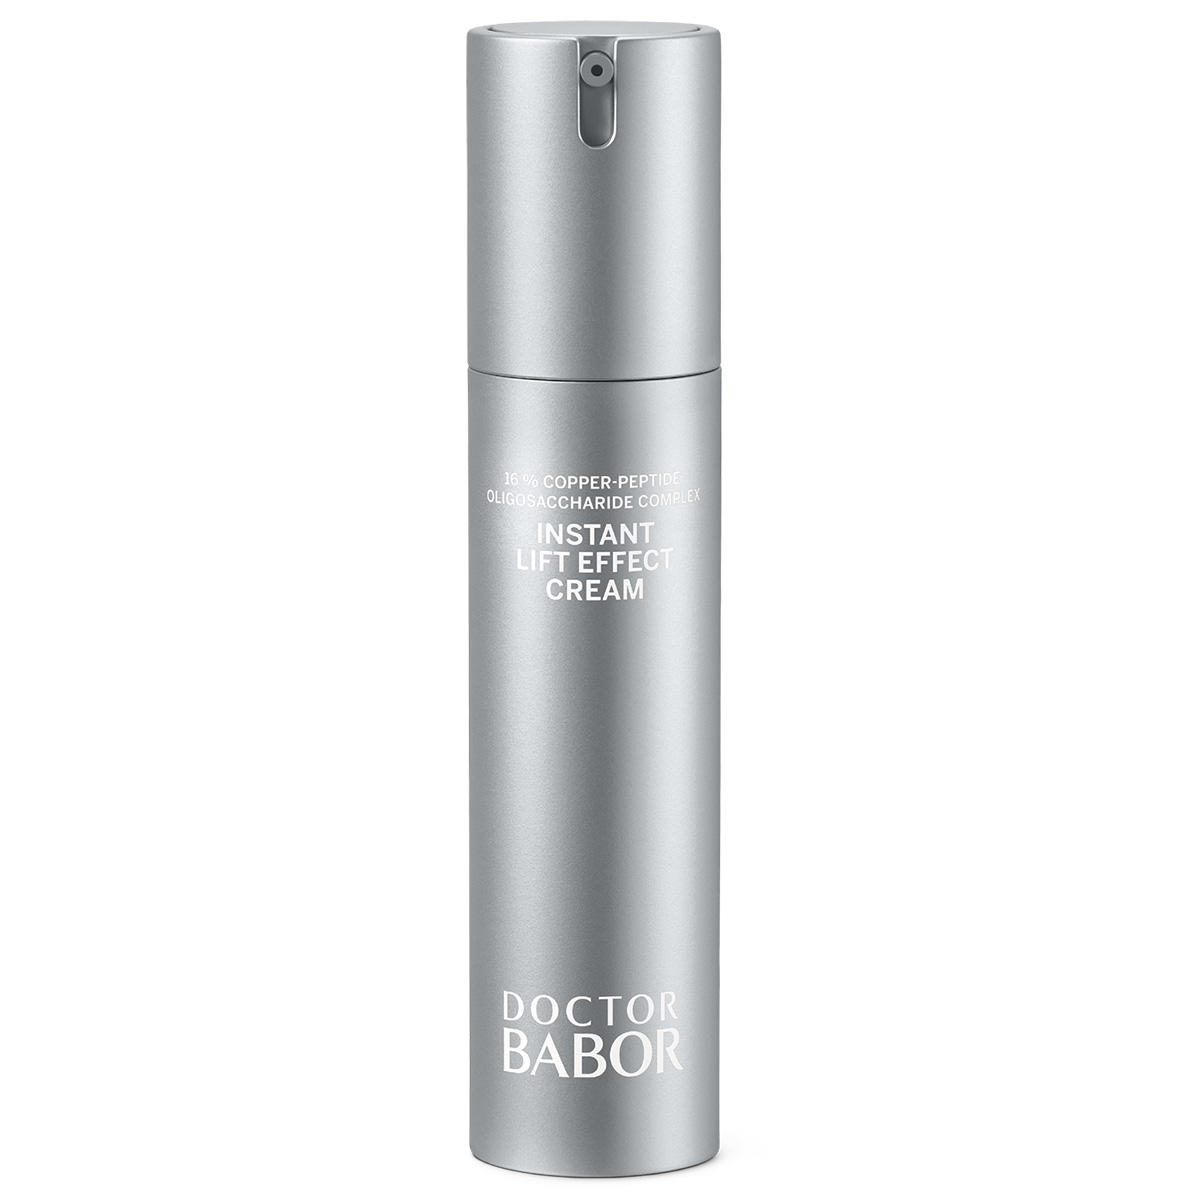 BABOR DOCTOR BABOR LIFTING INSTANT LIFT EFFECT CREAM 50 ml - 1